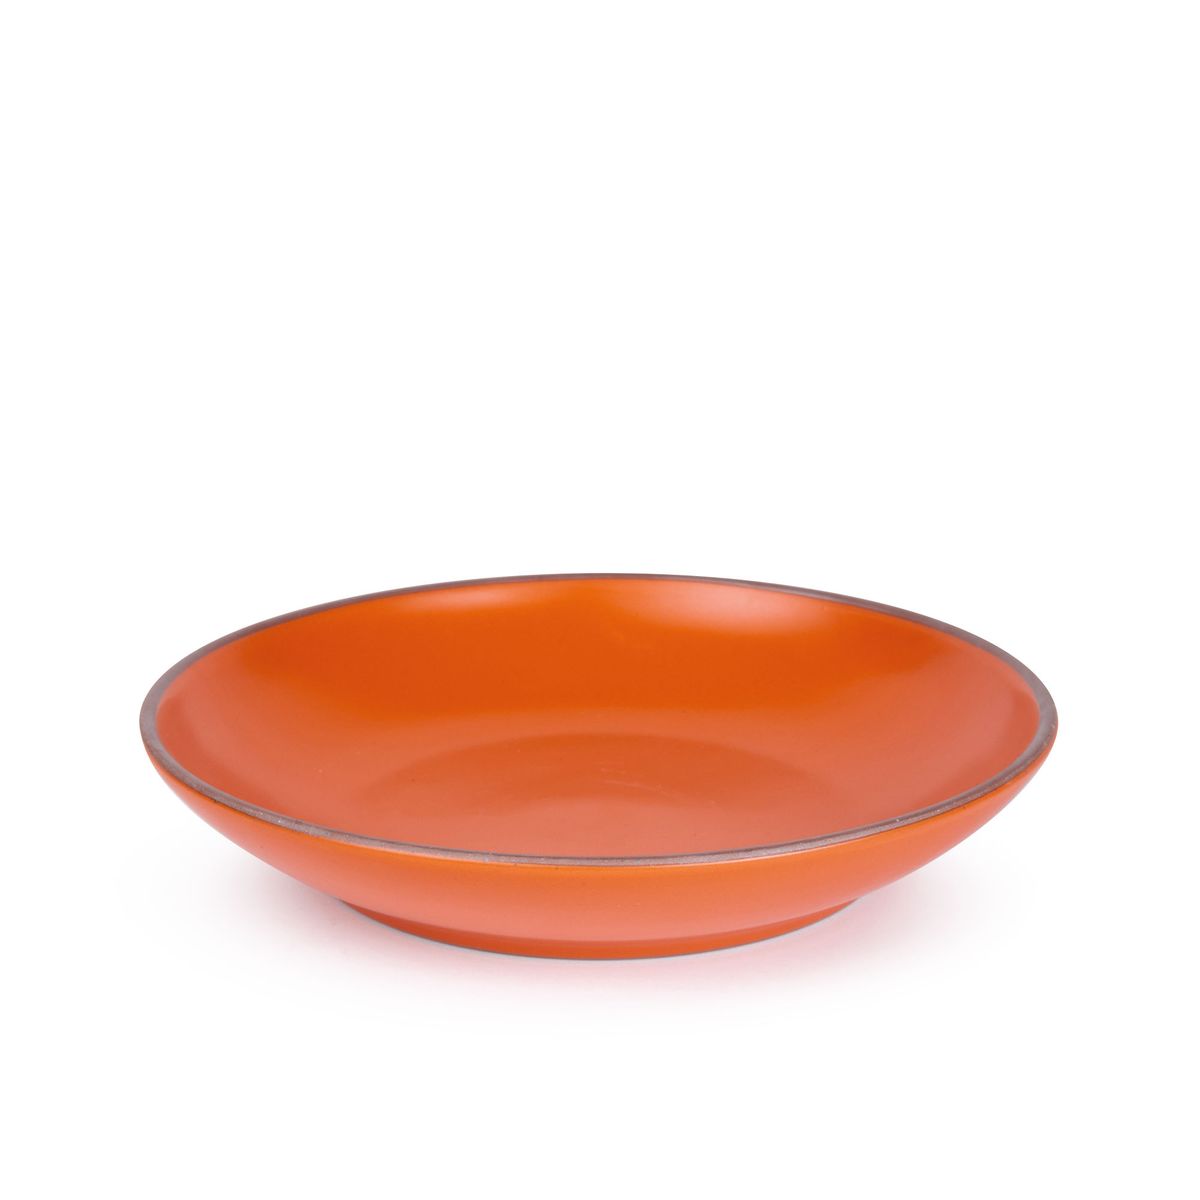 A large ceramic plate with a curved bowl edge in a bold orange color featuring iron speckles and an unglazed rim.